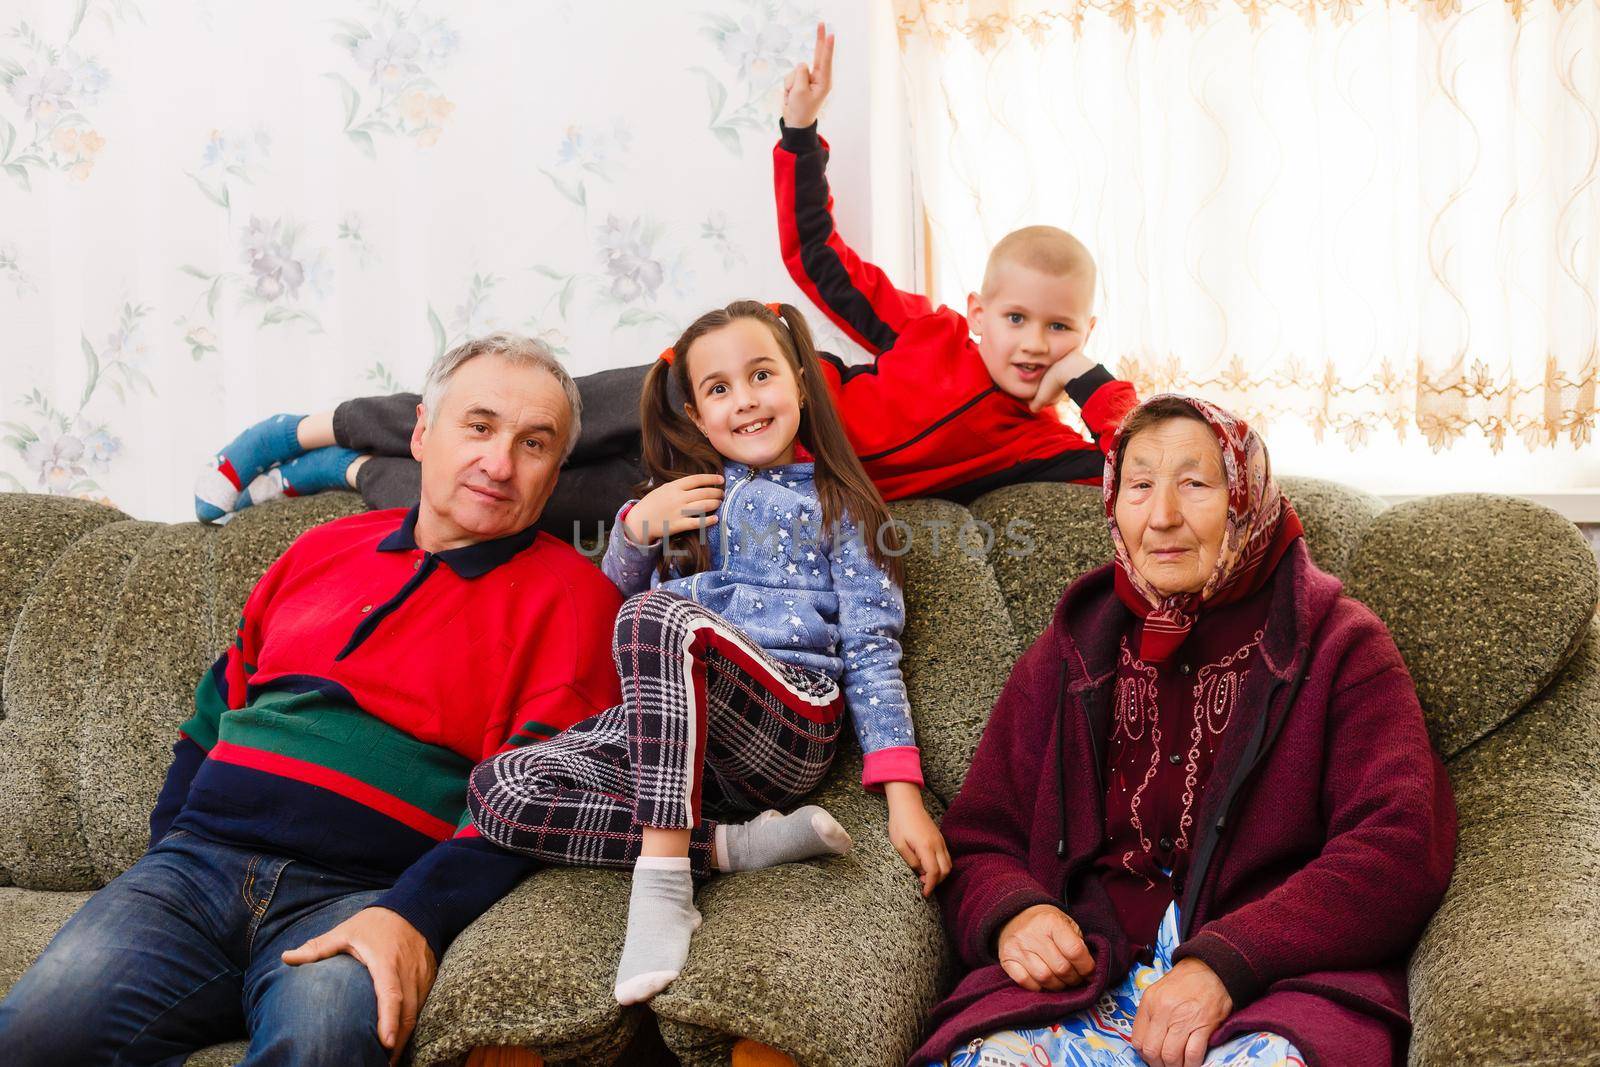 Grandchildren jumping on couch with their grandparents in the living room by Andelov13